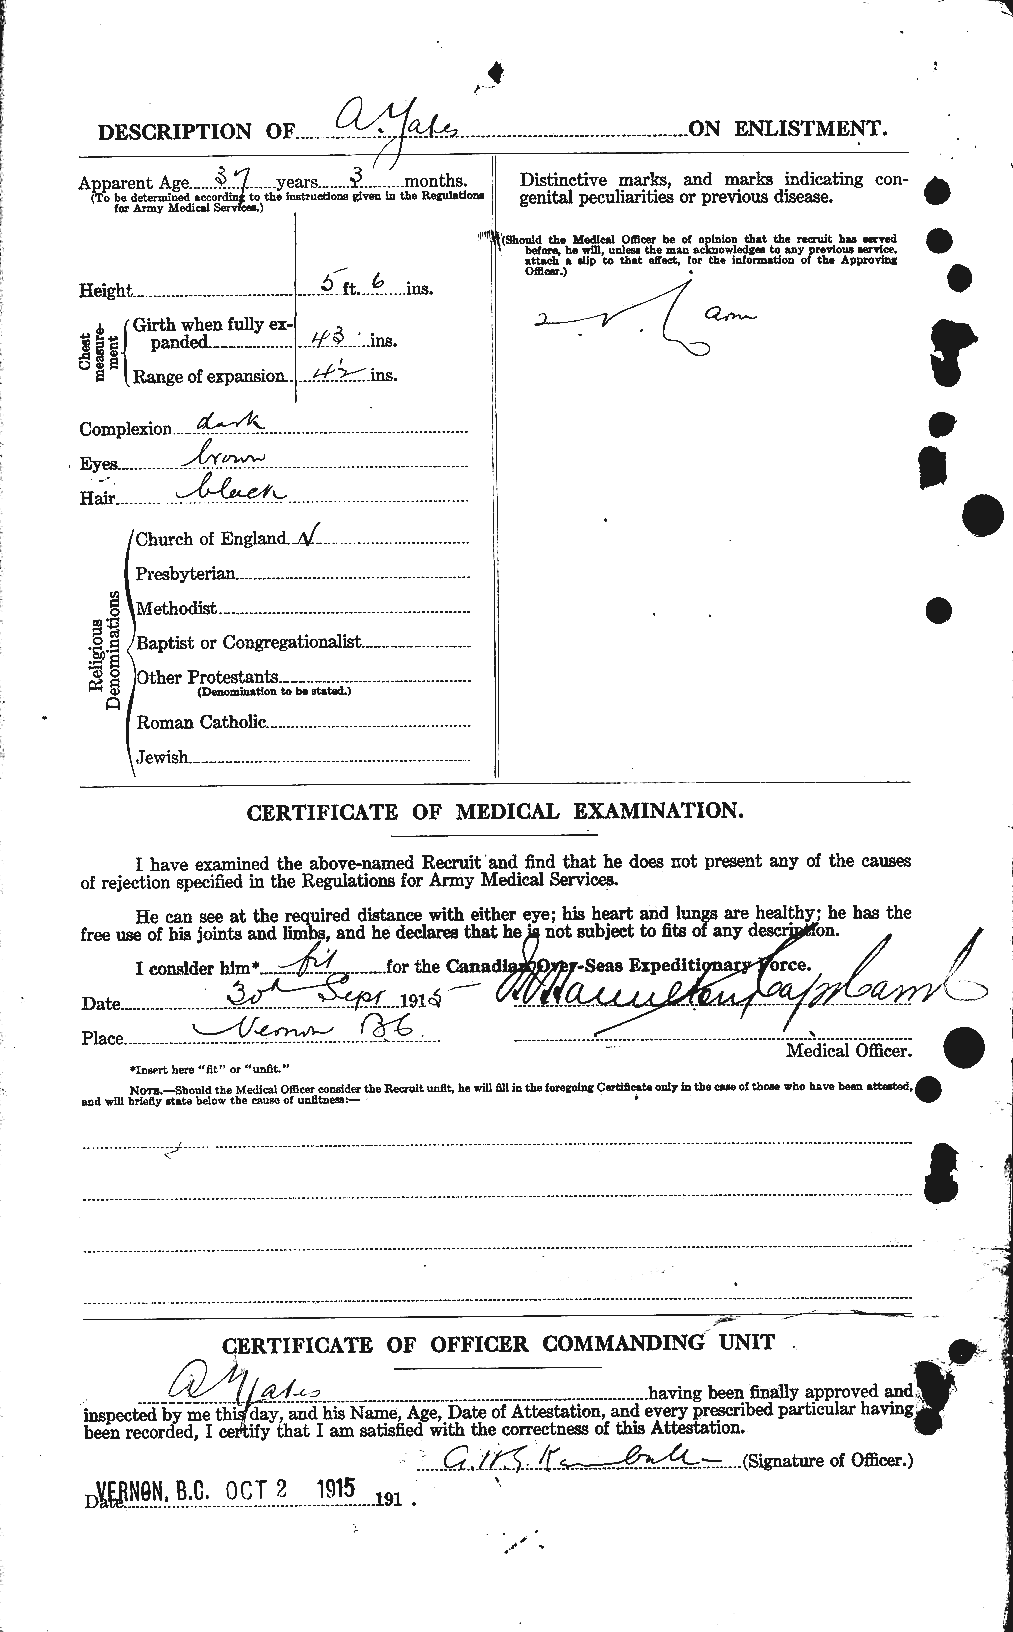 Personnel Records of the First World War - CEF 689626b